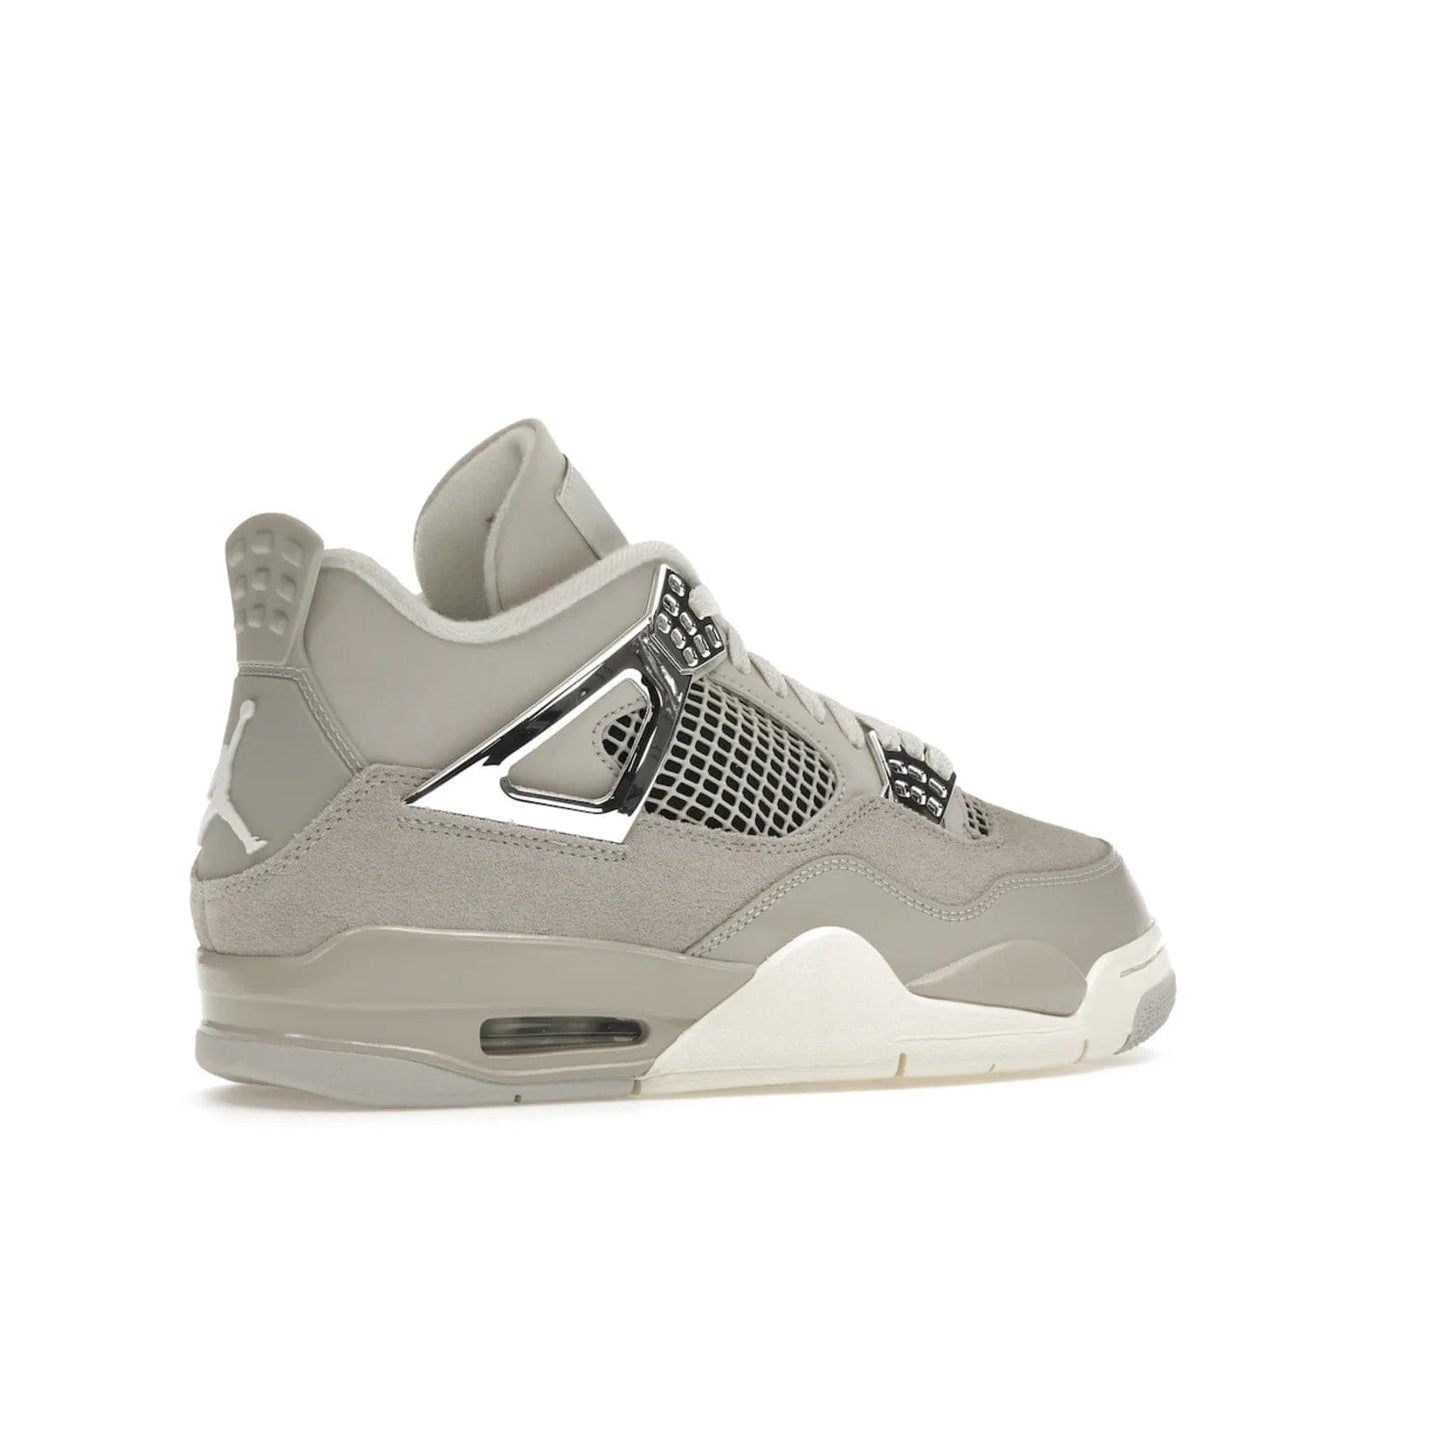 Jordan 4 Retro Frozen Moments (Women's) - Image 34 - Only at www.BallersClubKickz.com - The Jordan 4 Retro Frozen Moments is a stylish blend of classic design elements and modern tones. Featuring suede and leather overlays in a light iron-ore, sail, neutral grey, black, and metallic silver colorway. Get this iconic high-performance sneaker for $210.